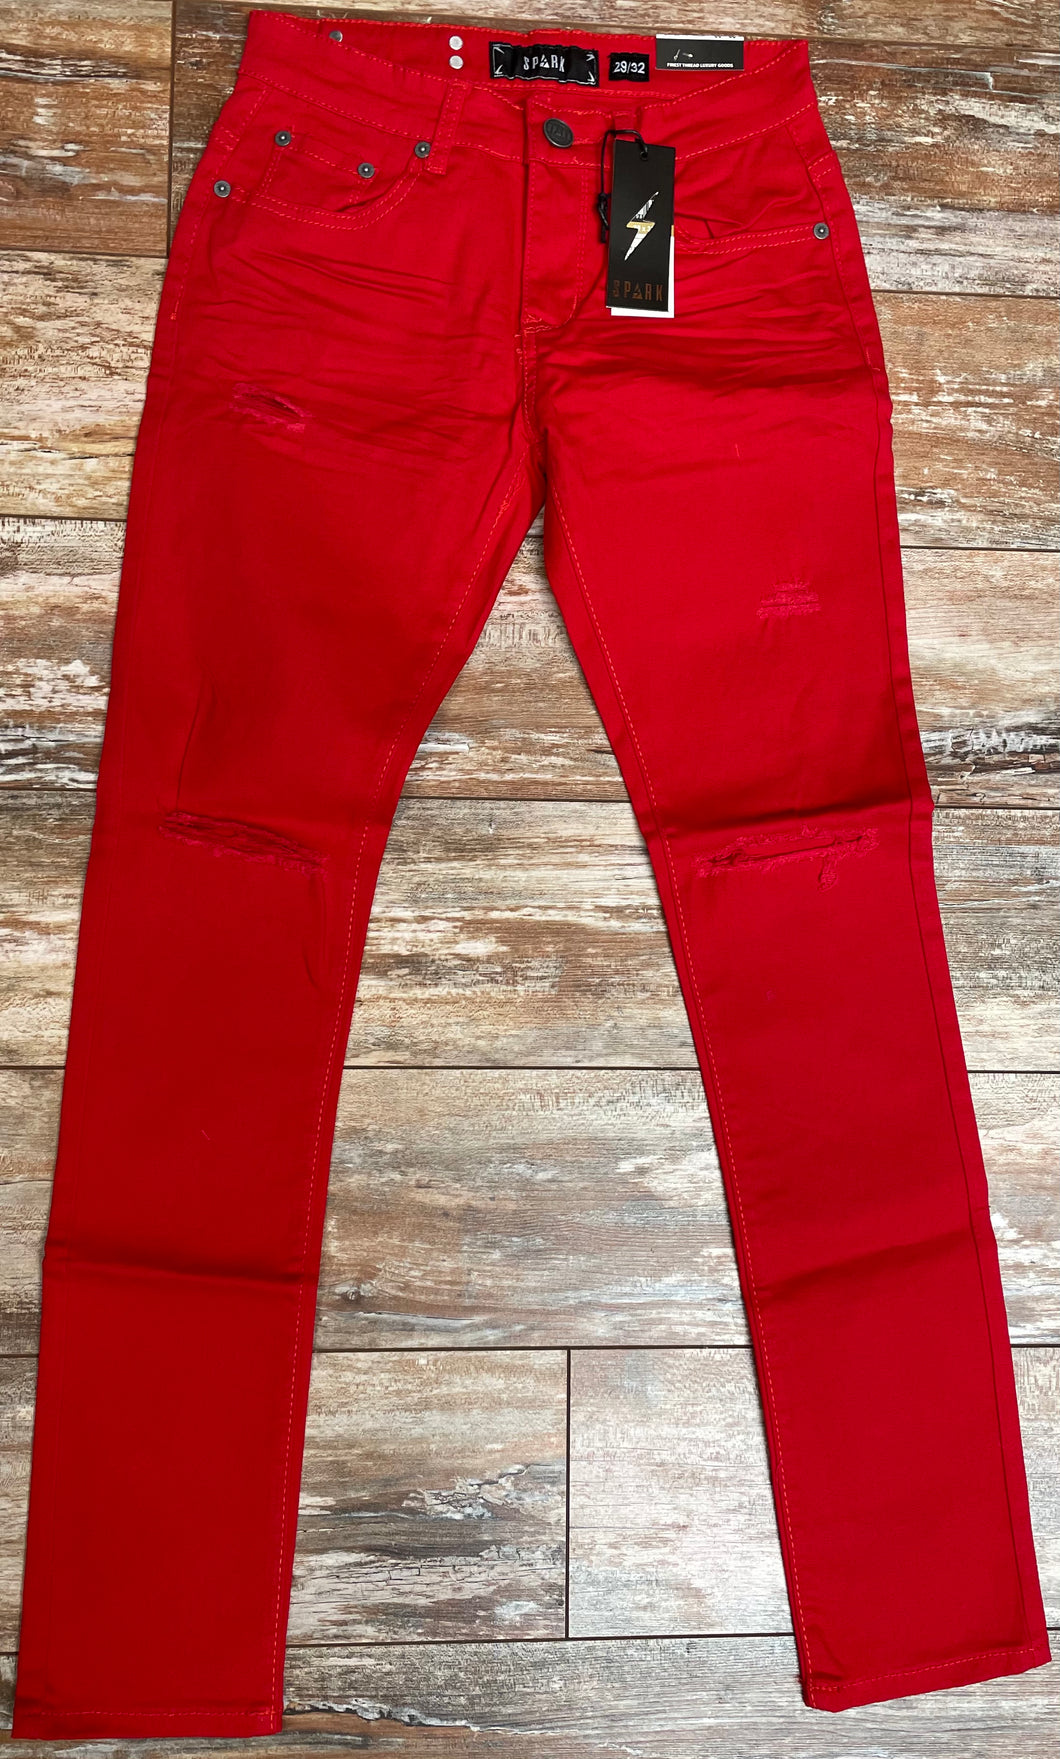 Spark red jeans